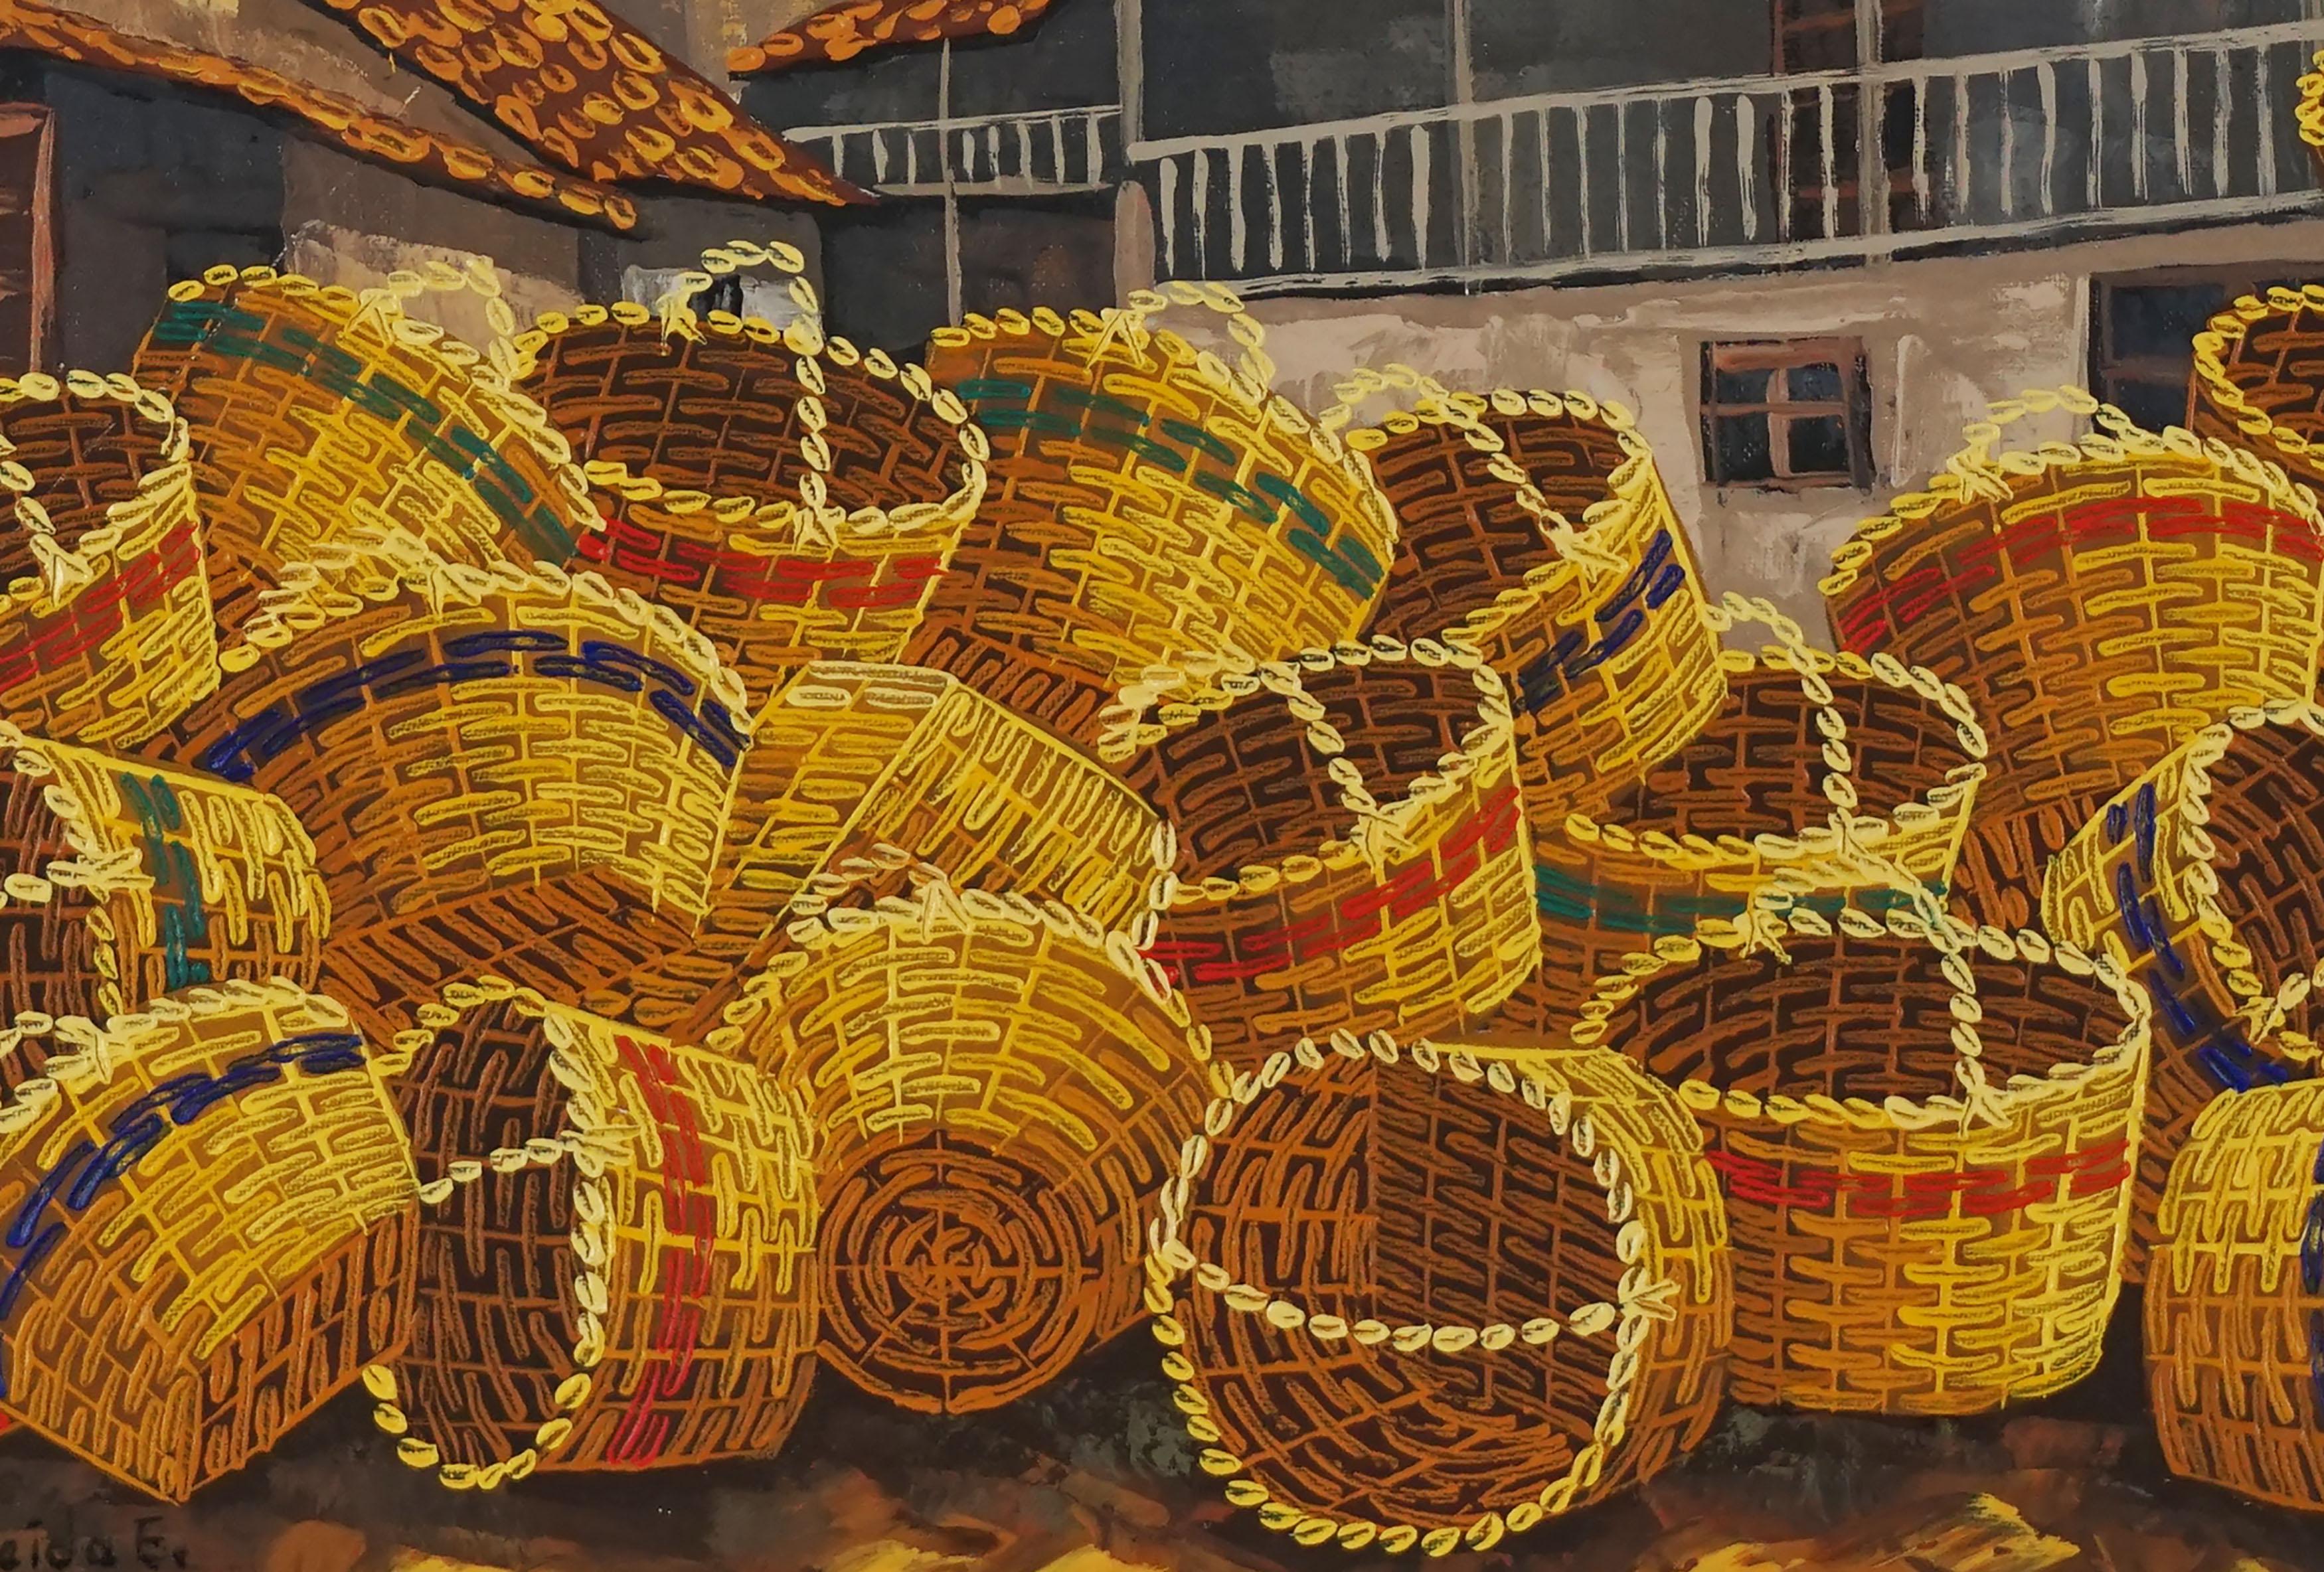 Market Baskets in Old Town - Brown Landscape Painting by J Almeida E